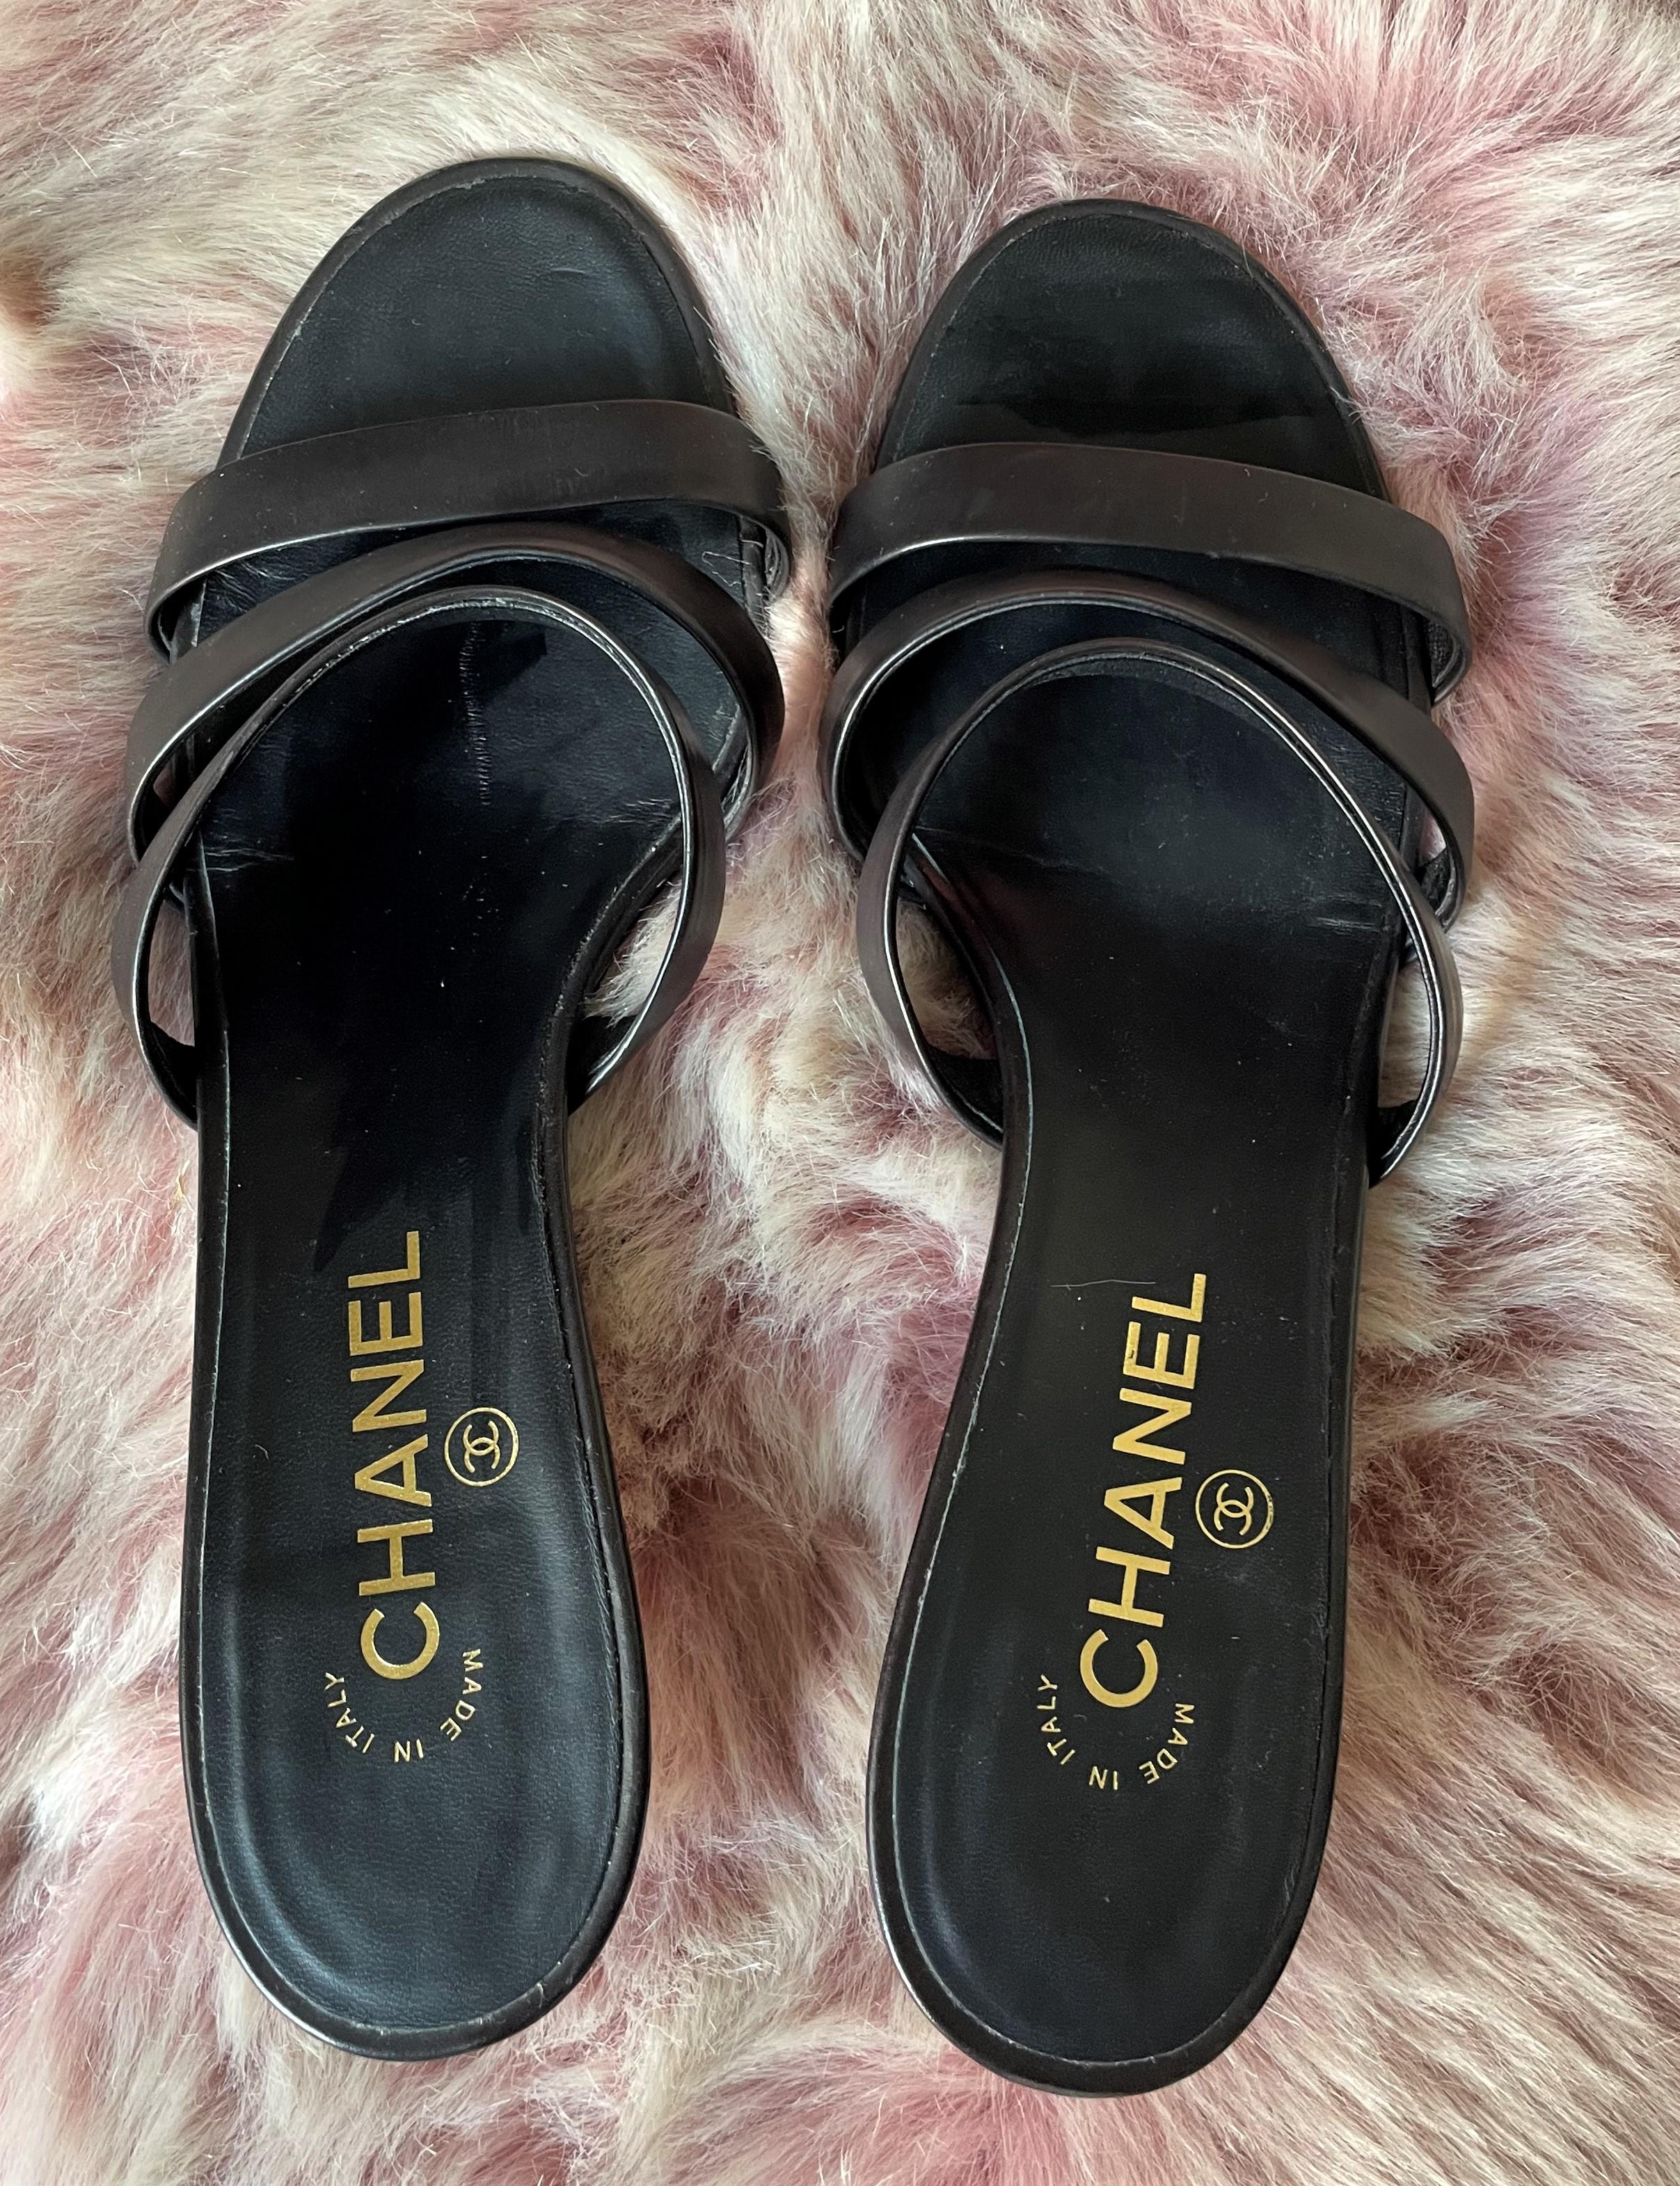 chanel black and white mules